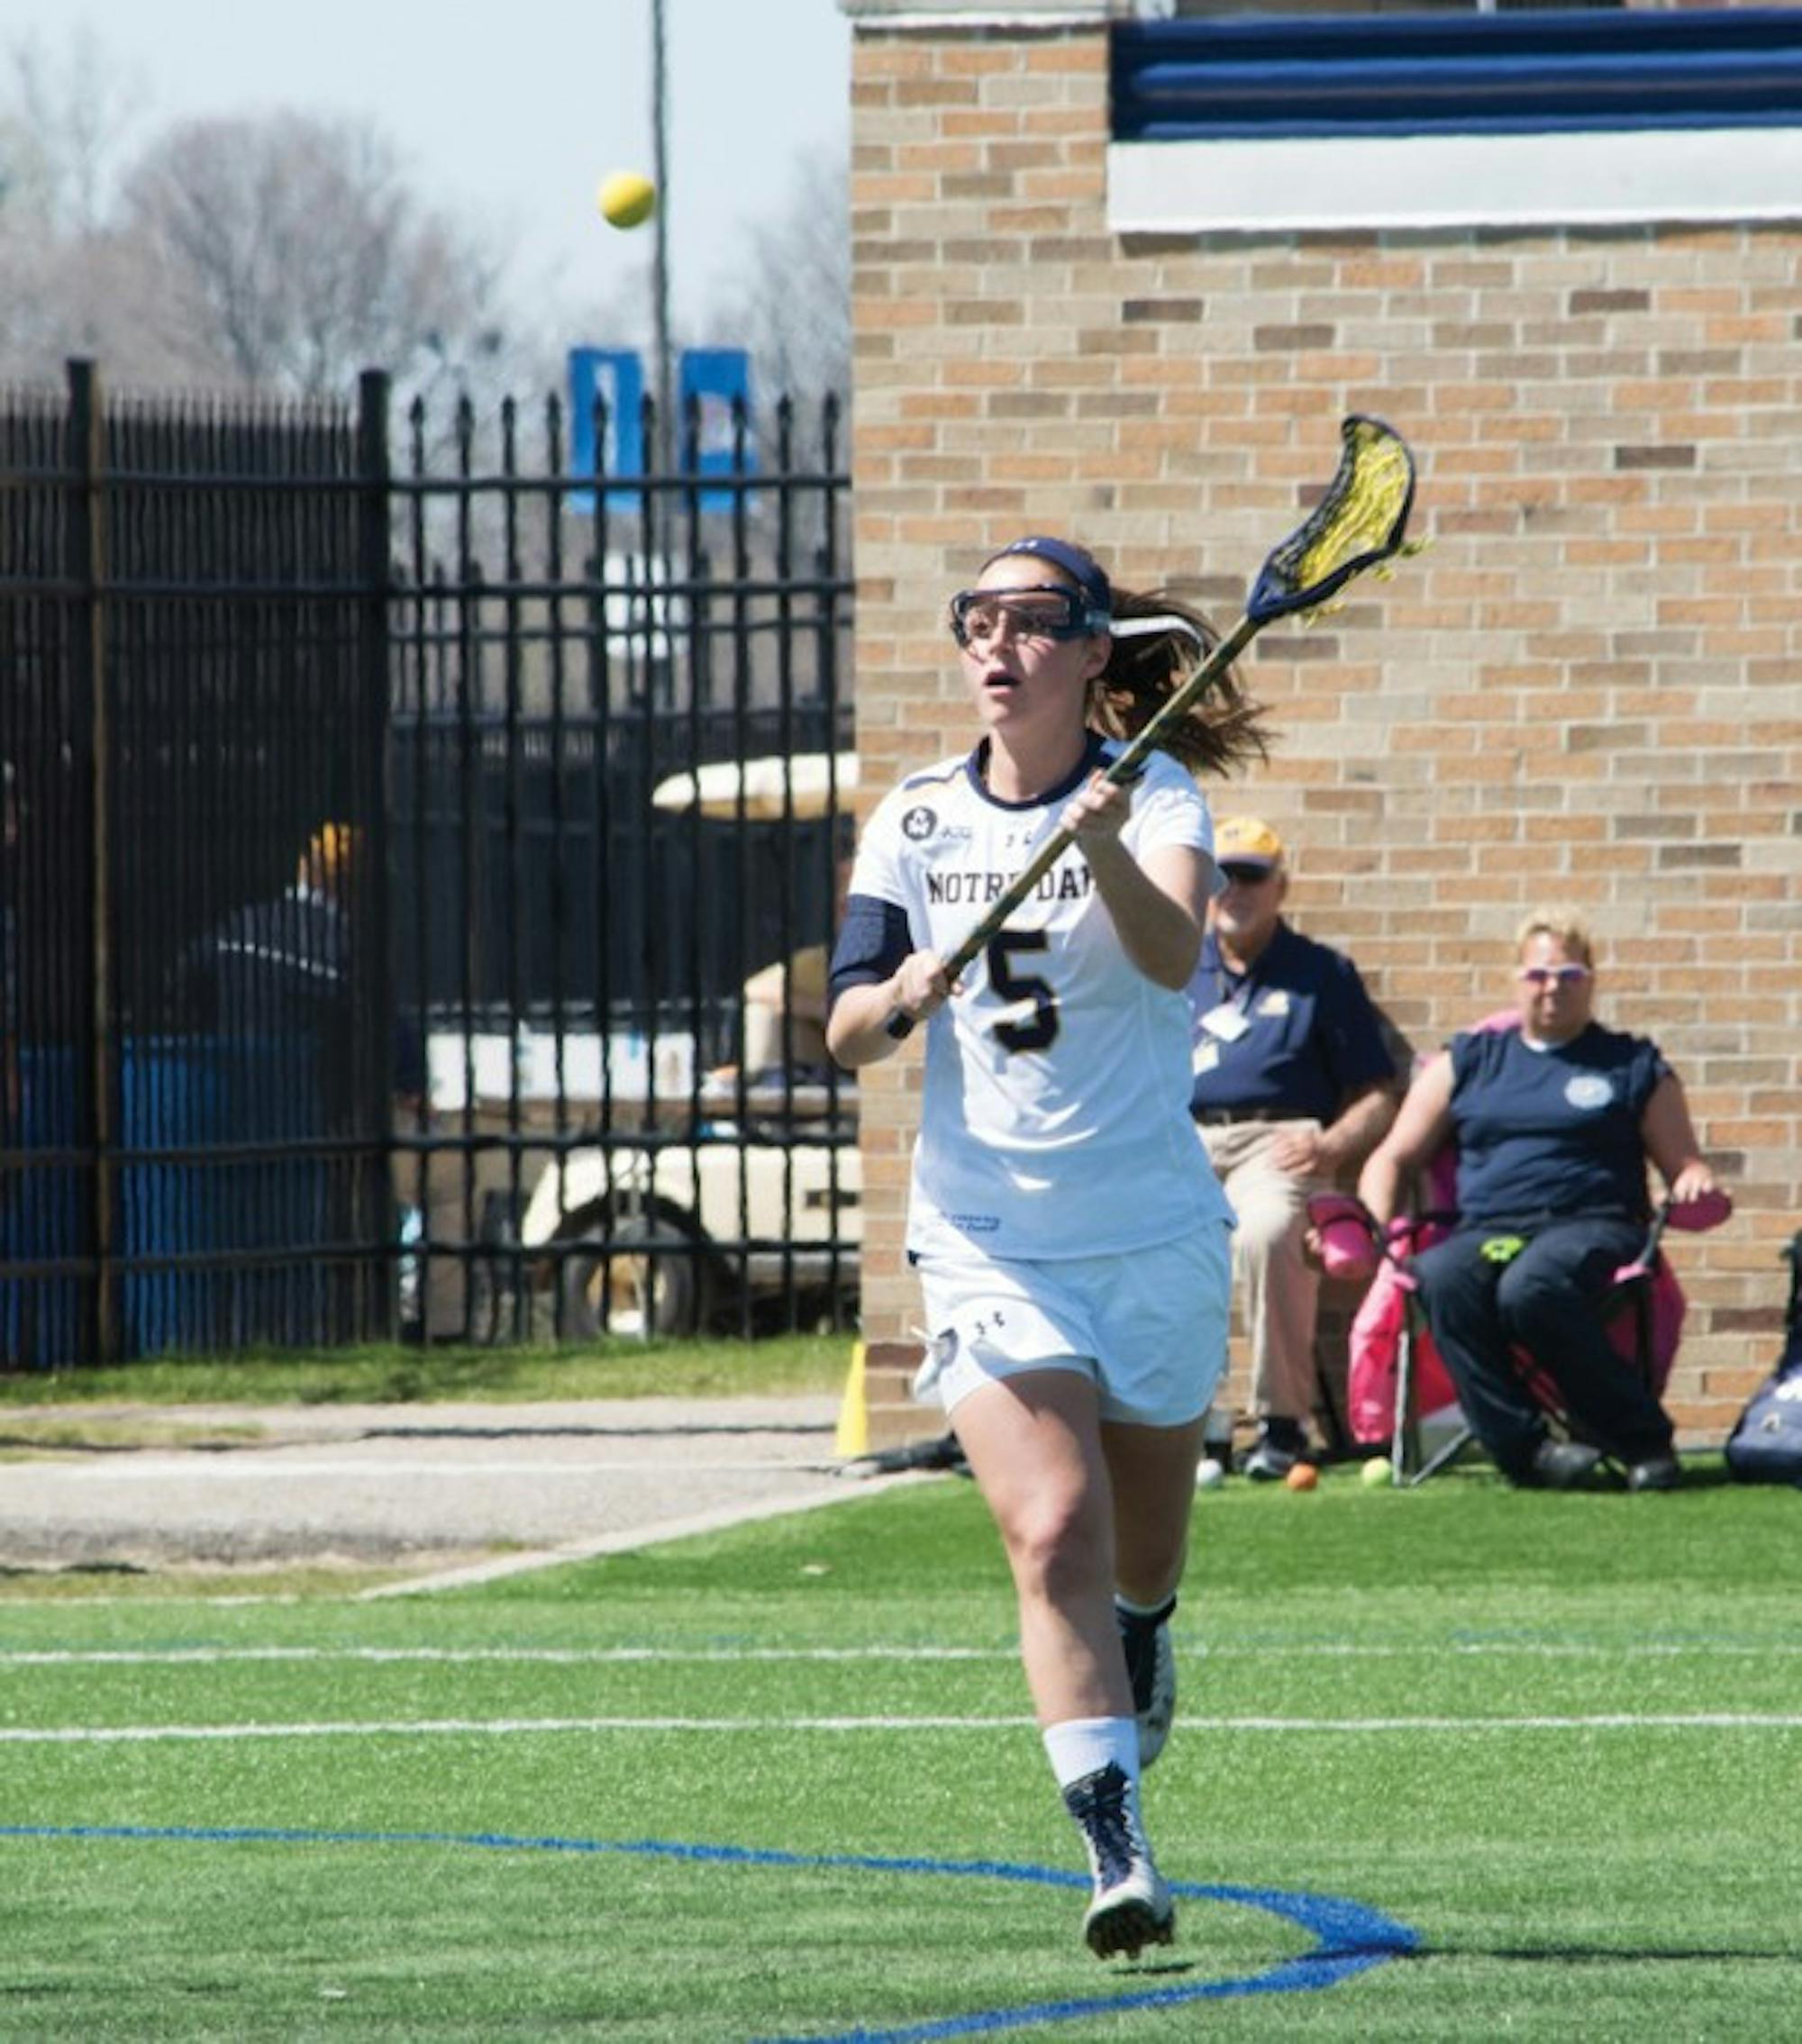 Senior attack Rachel Sexton looks to receive a pass during Notre Dame’s 10-9 victory over Duke on Saturday at Arlotta Stadium.